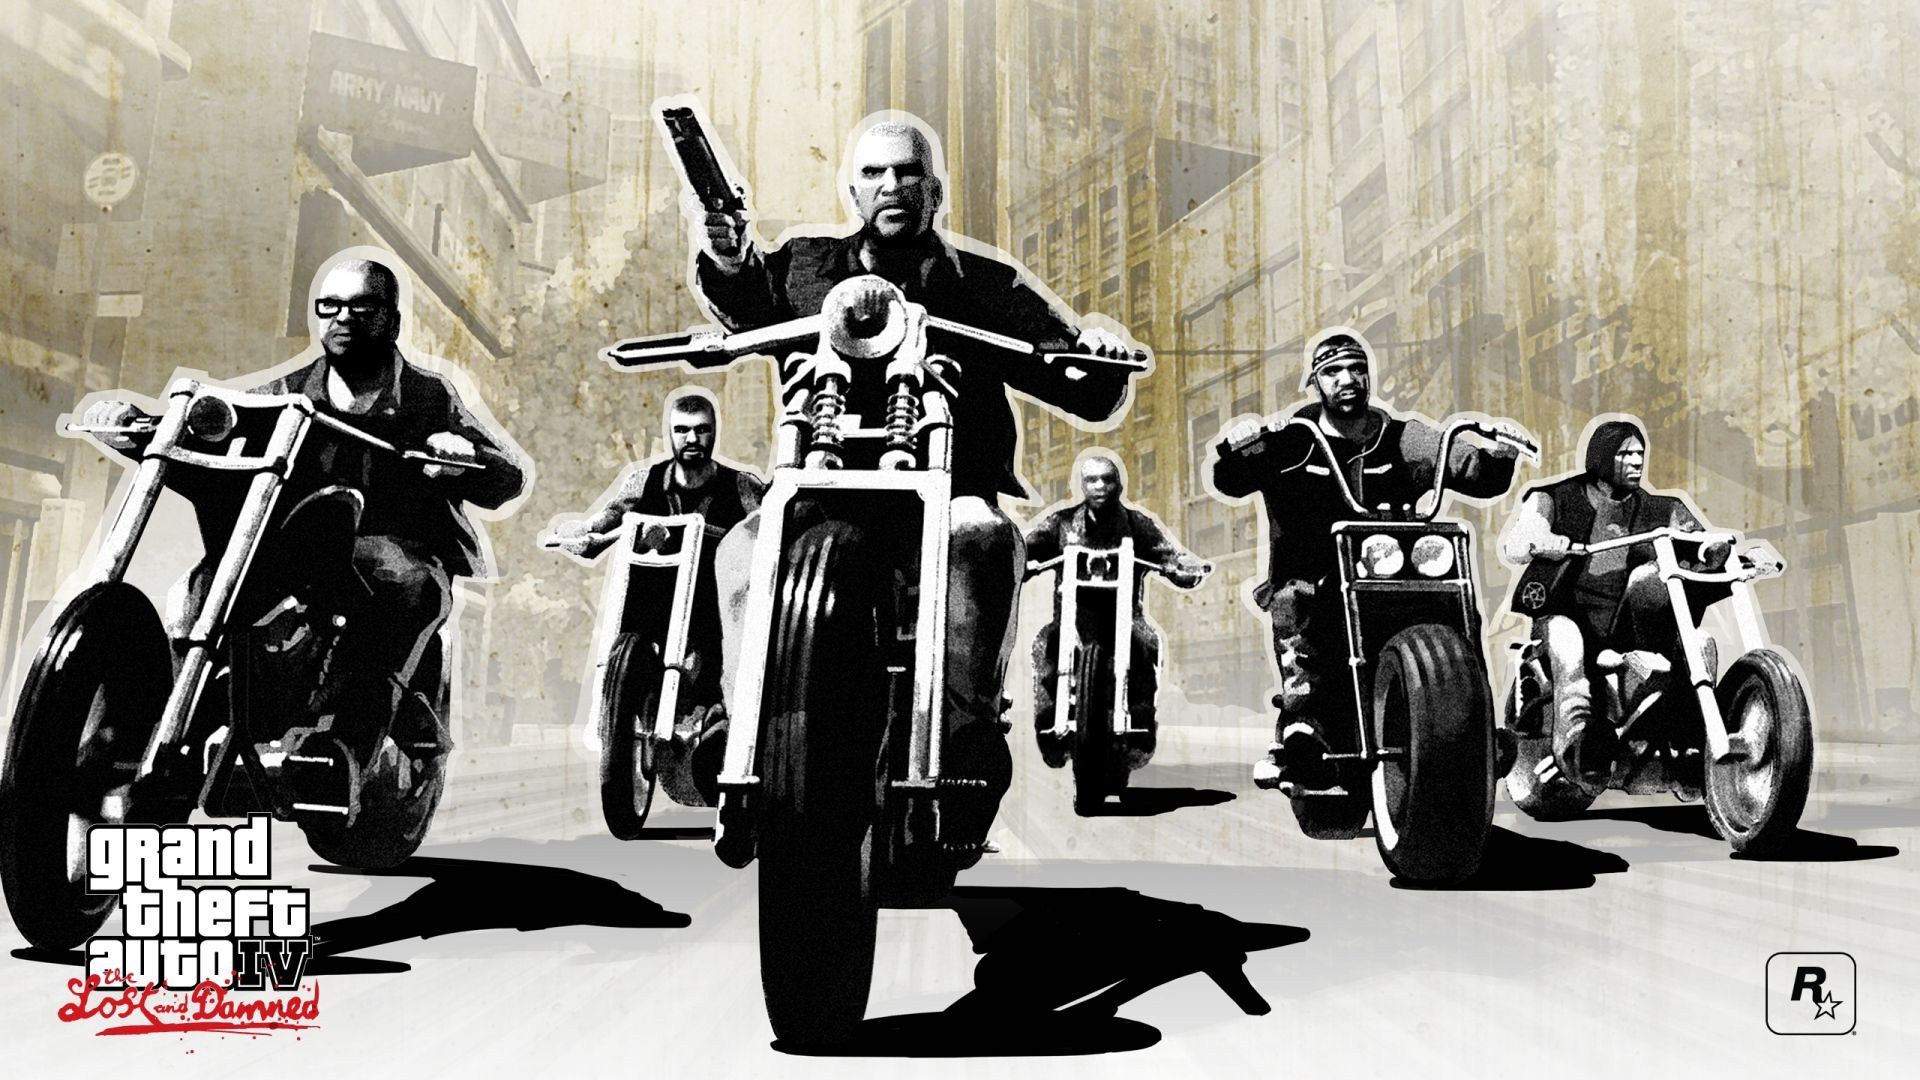 Download Wallpaper 1920x1080 gta 4 lost and damned, grand theft